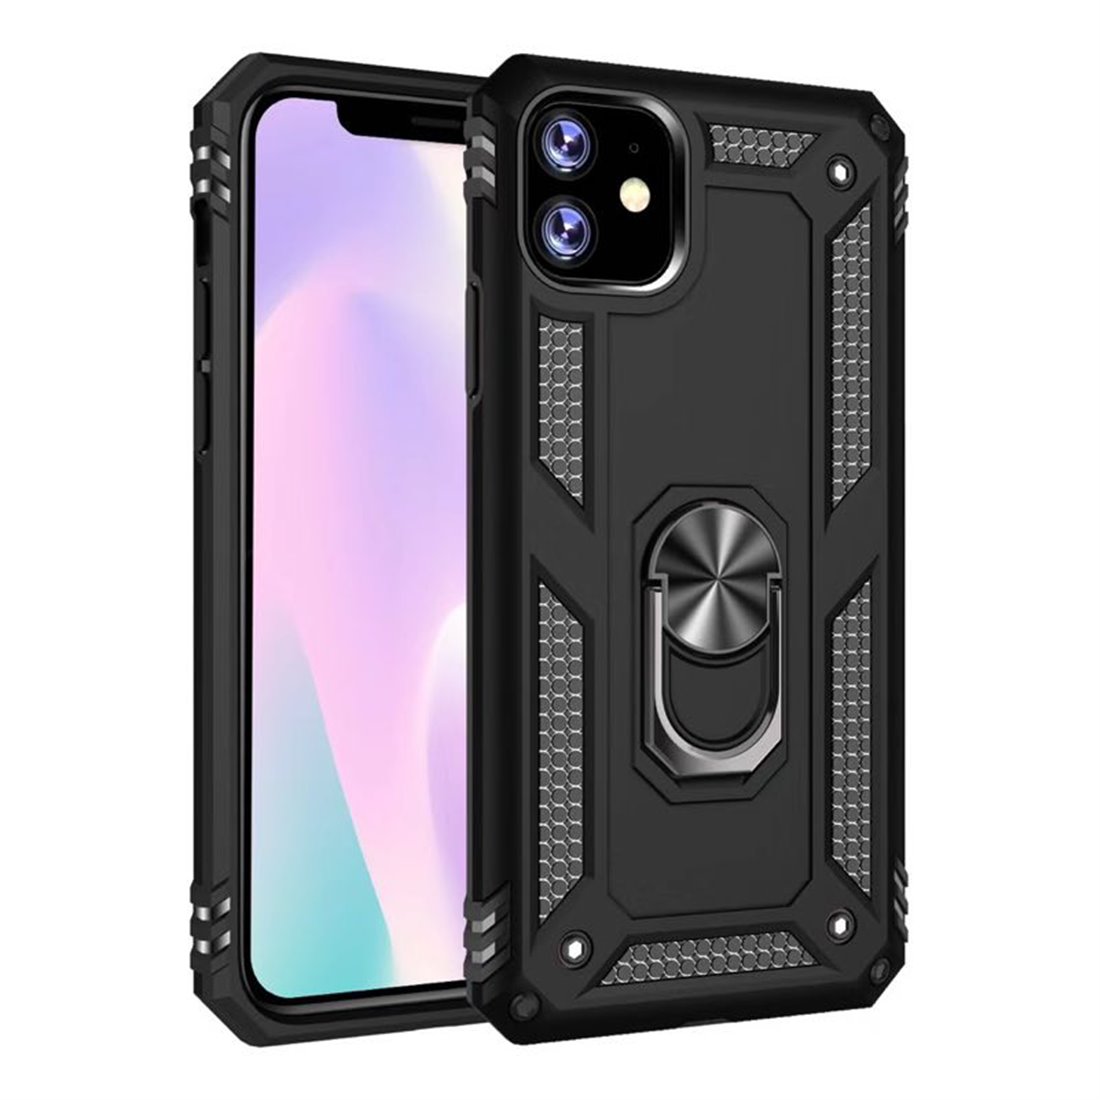 Apple iPhone 11 pro Plastic Black Back Cover - Solid ring